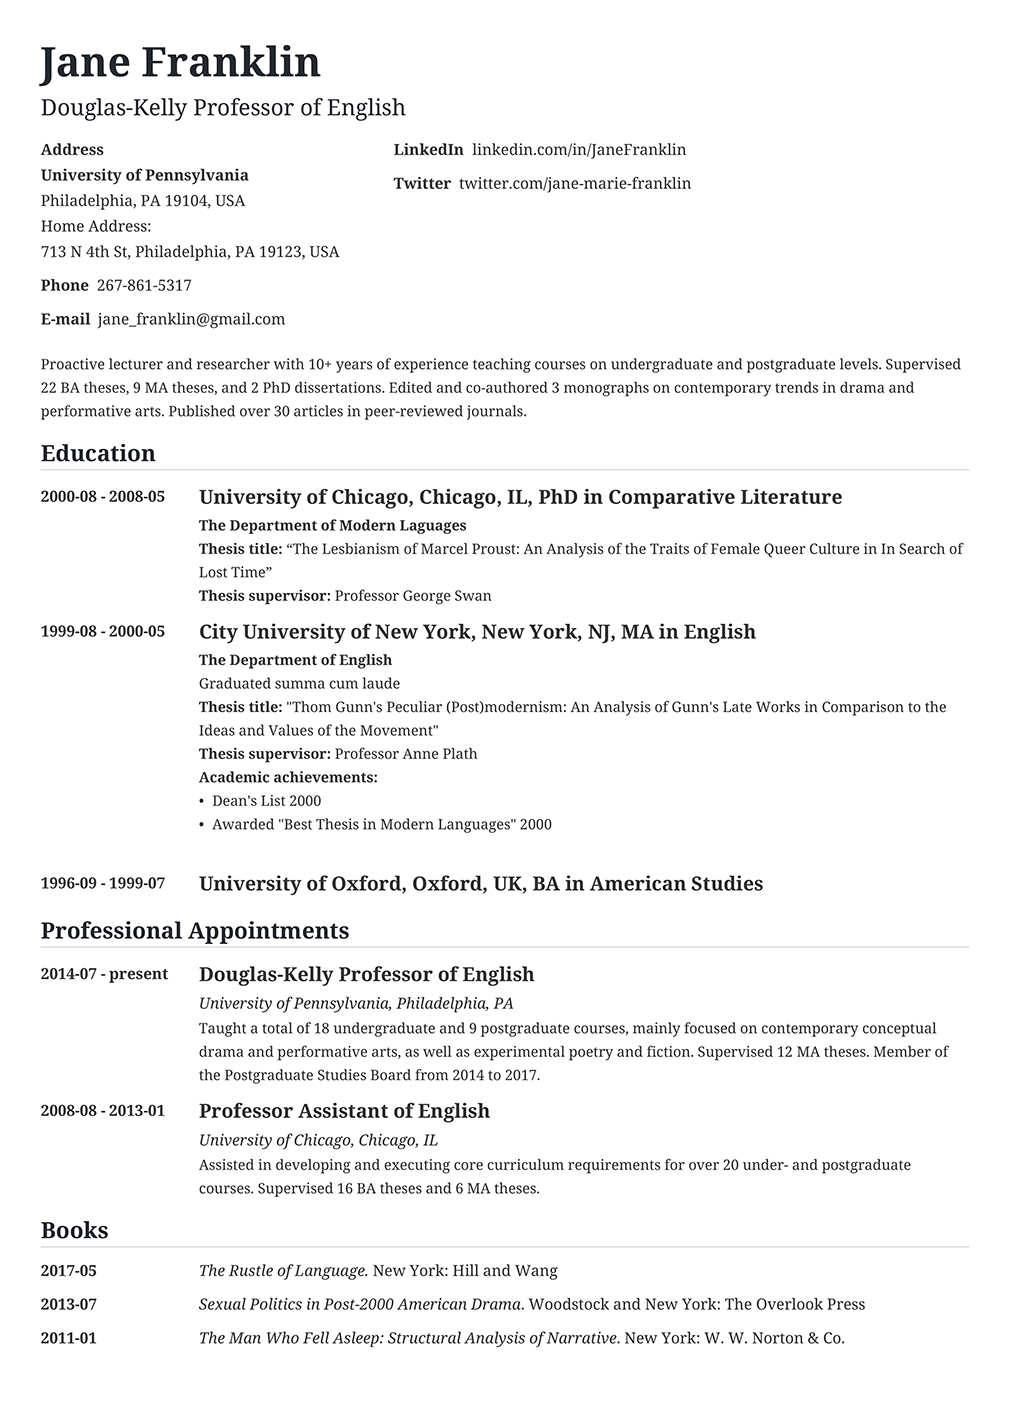 500 Cv Examples A Curriculum Vitae For Any Job Application with regard to measurements 1010 X 1428